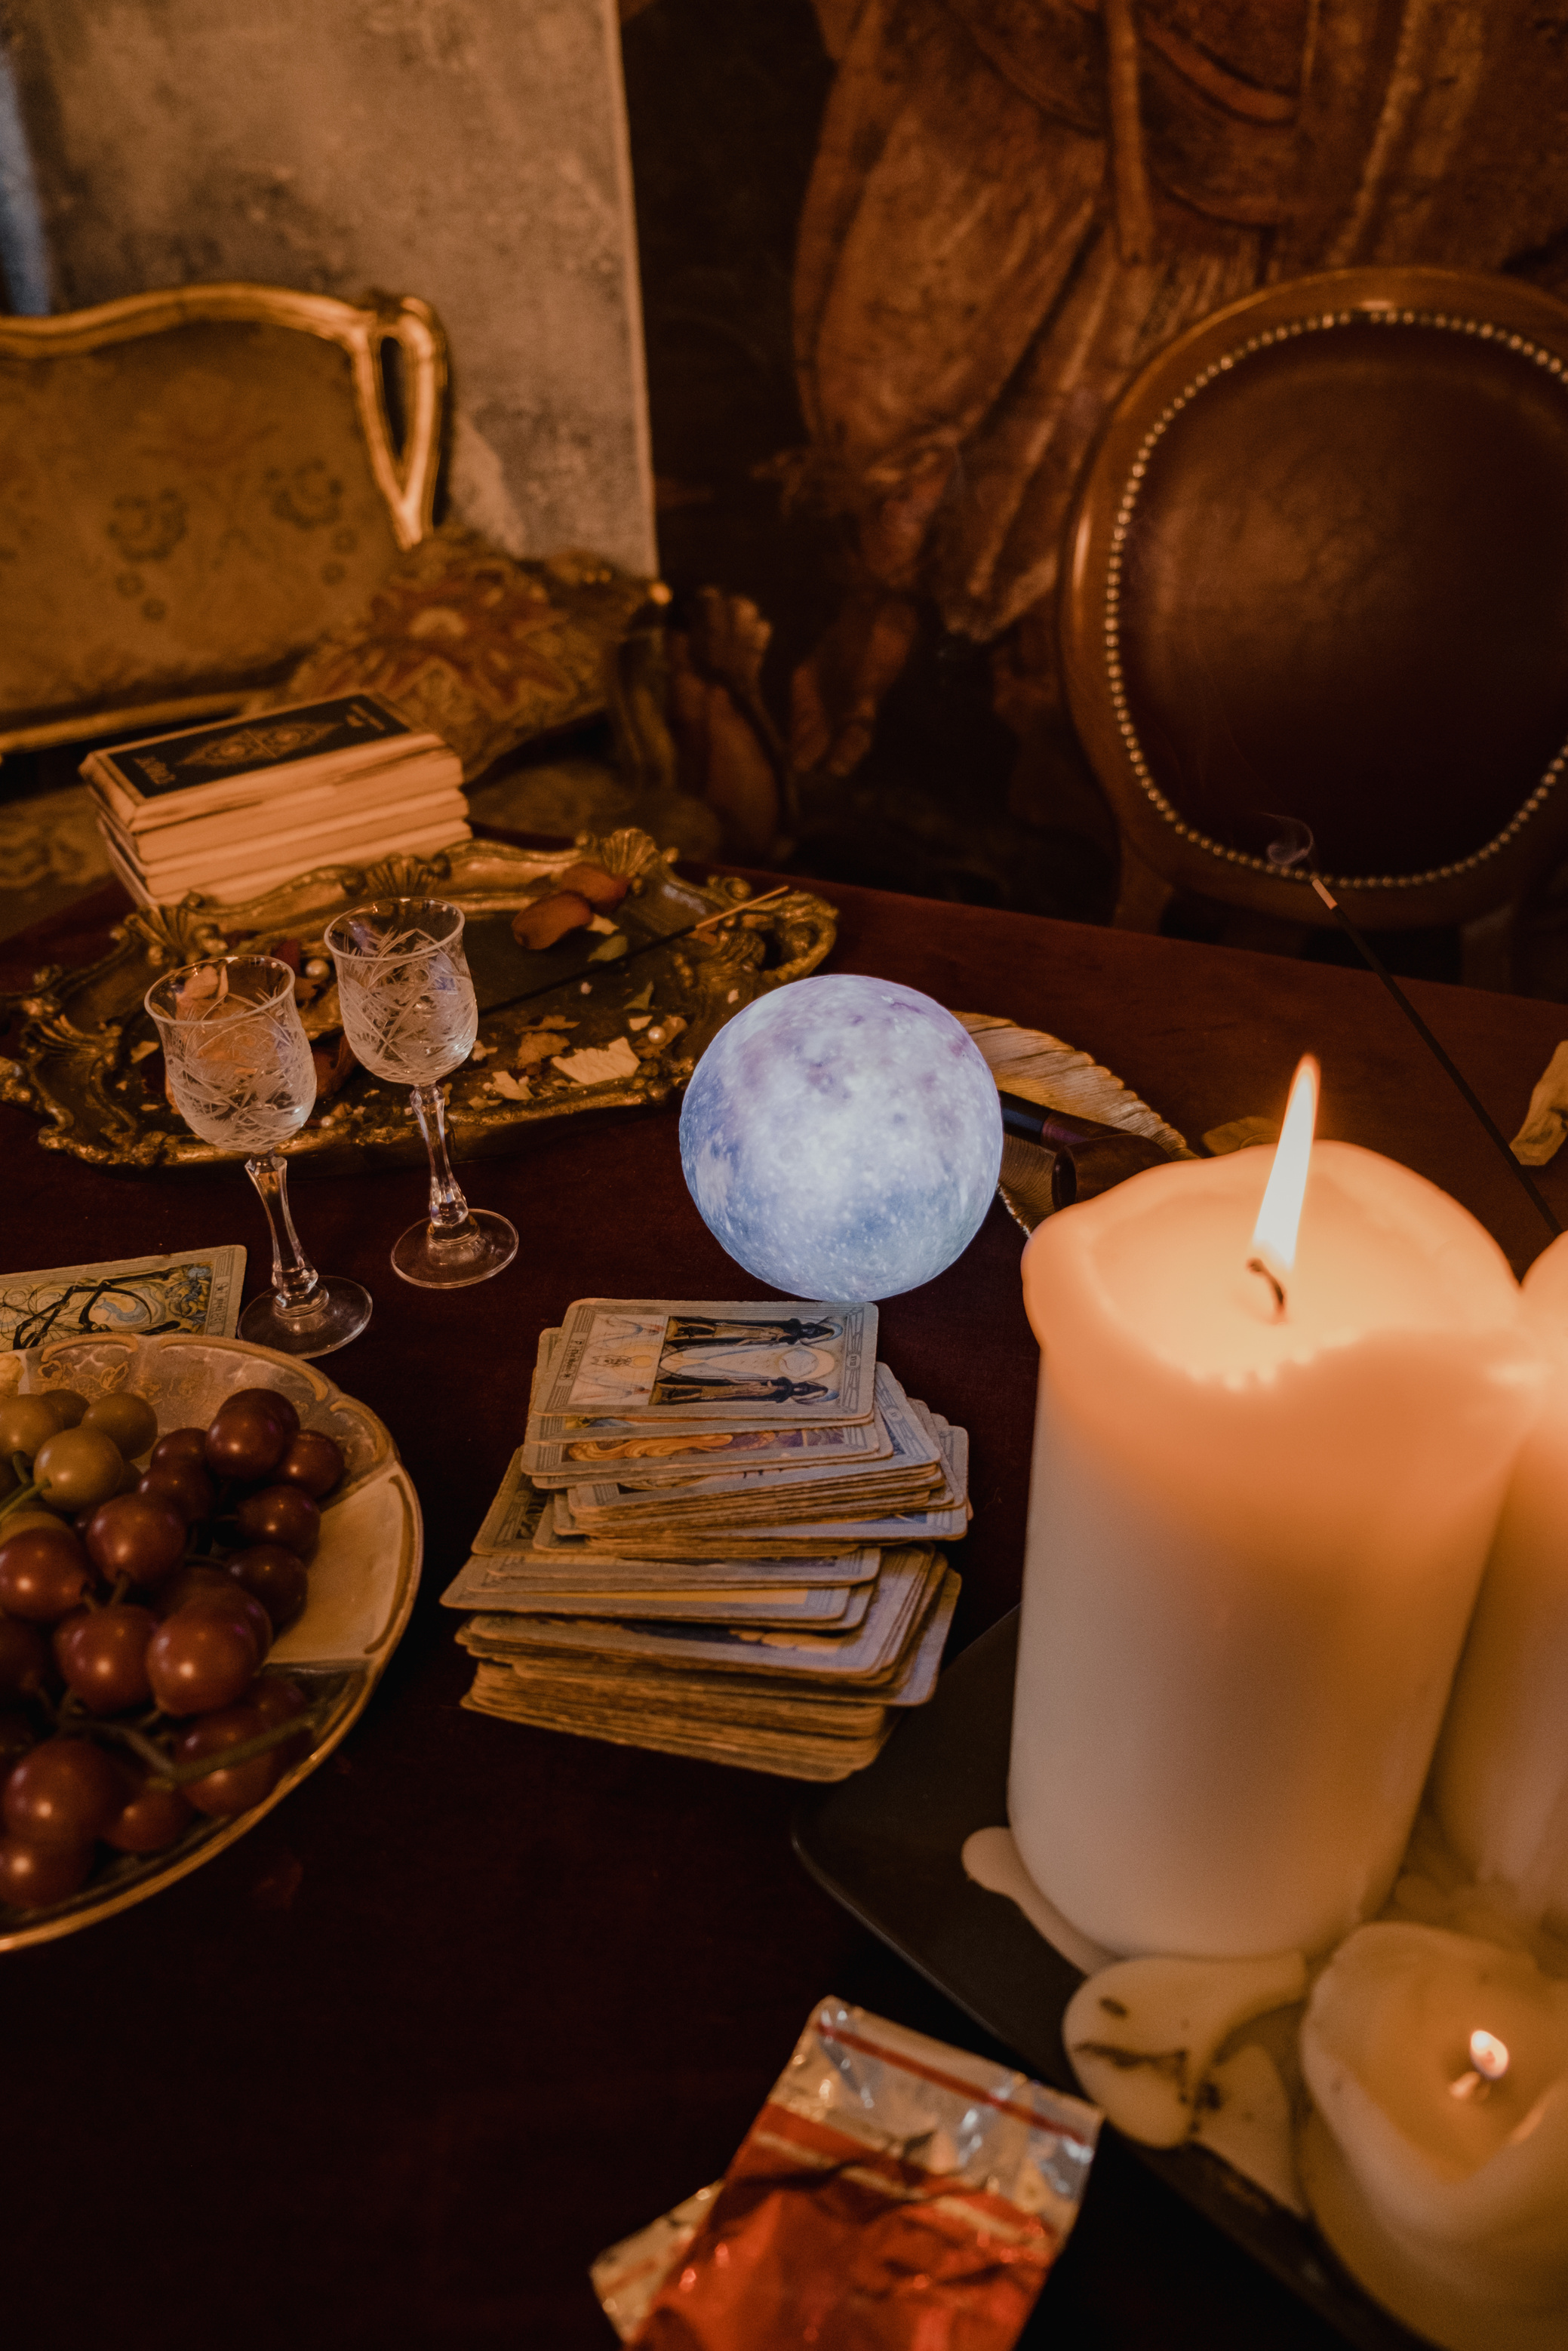 Tarot Cards, Crystal Ball, Candles, Glasses, and Fruits